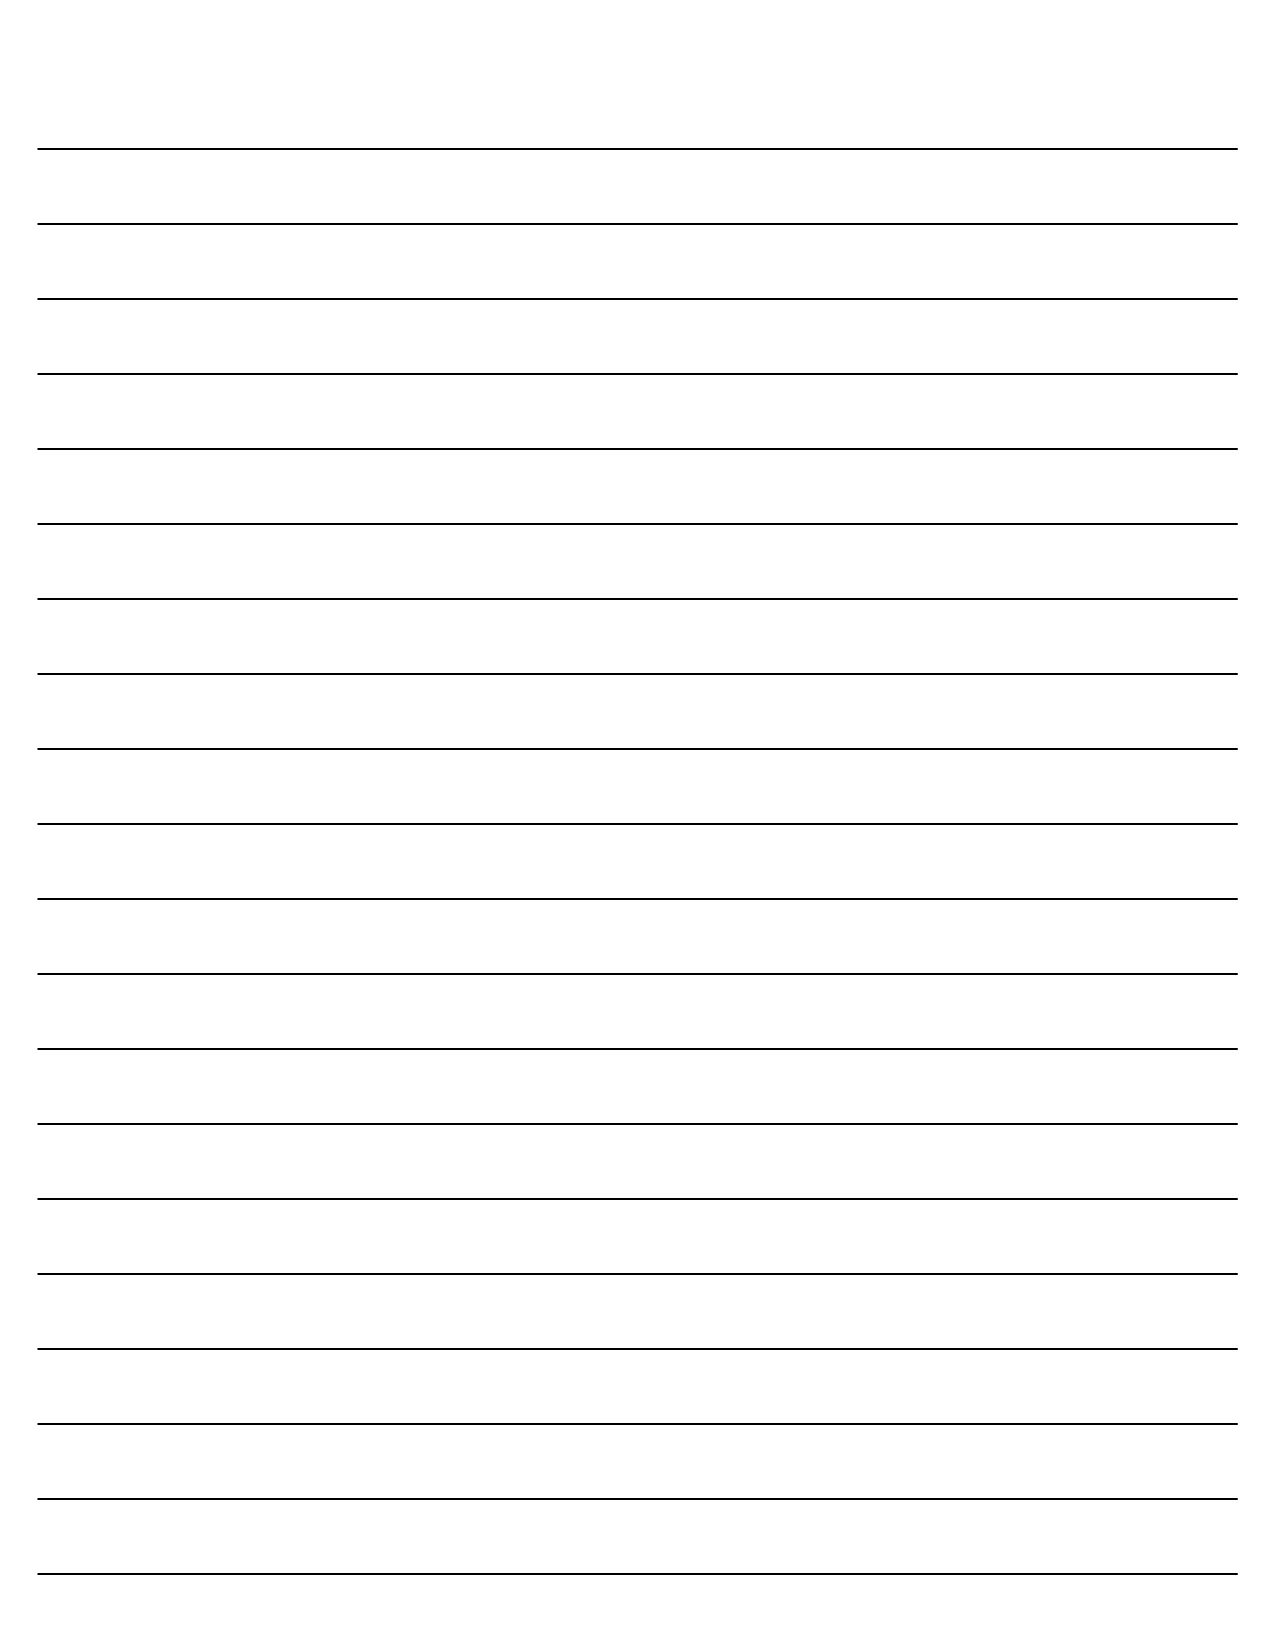 Free Printable Lined Writing Paper Template | Printables | Pinterest - Free Printable Lined Paper